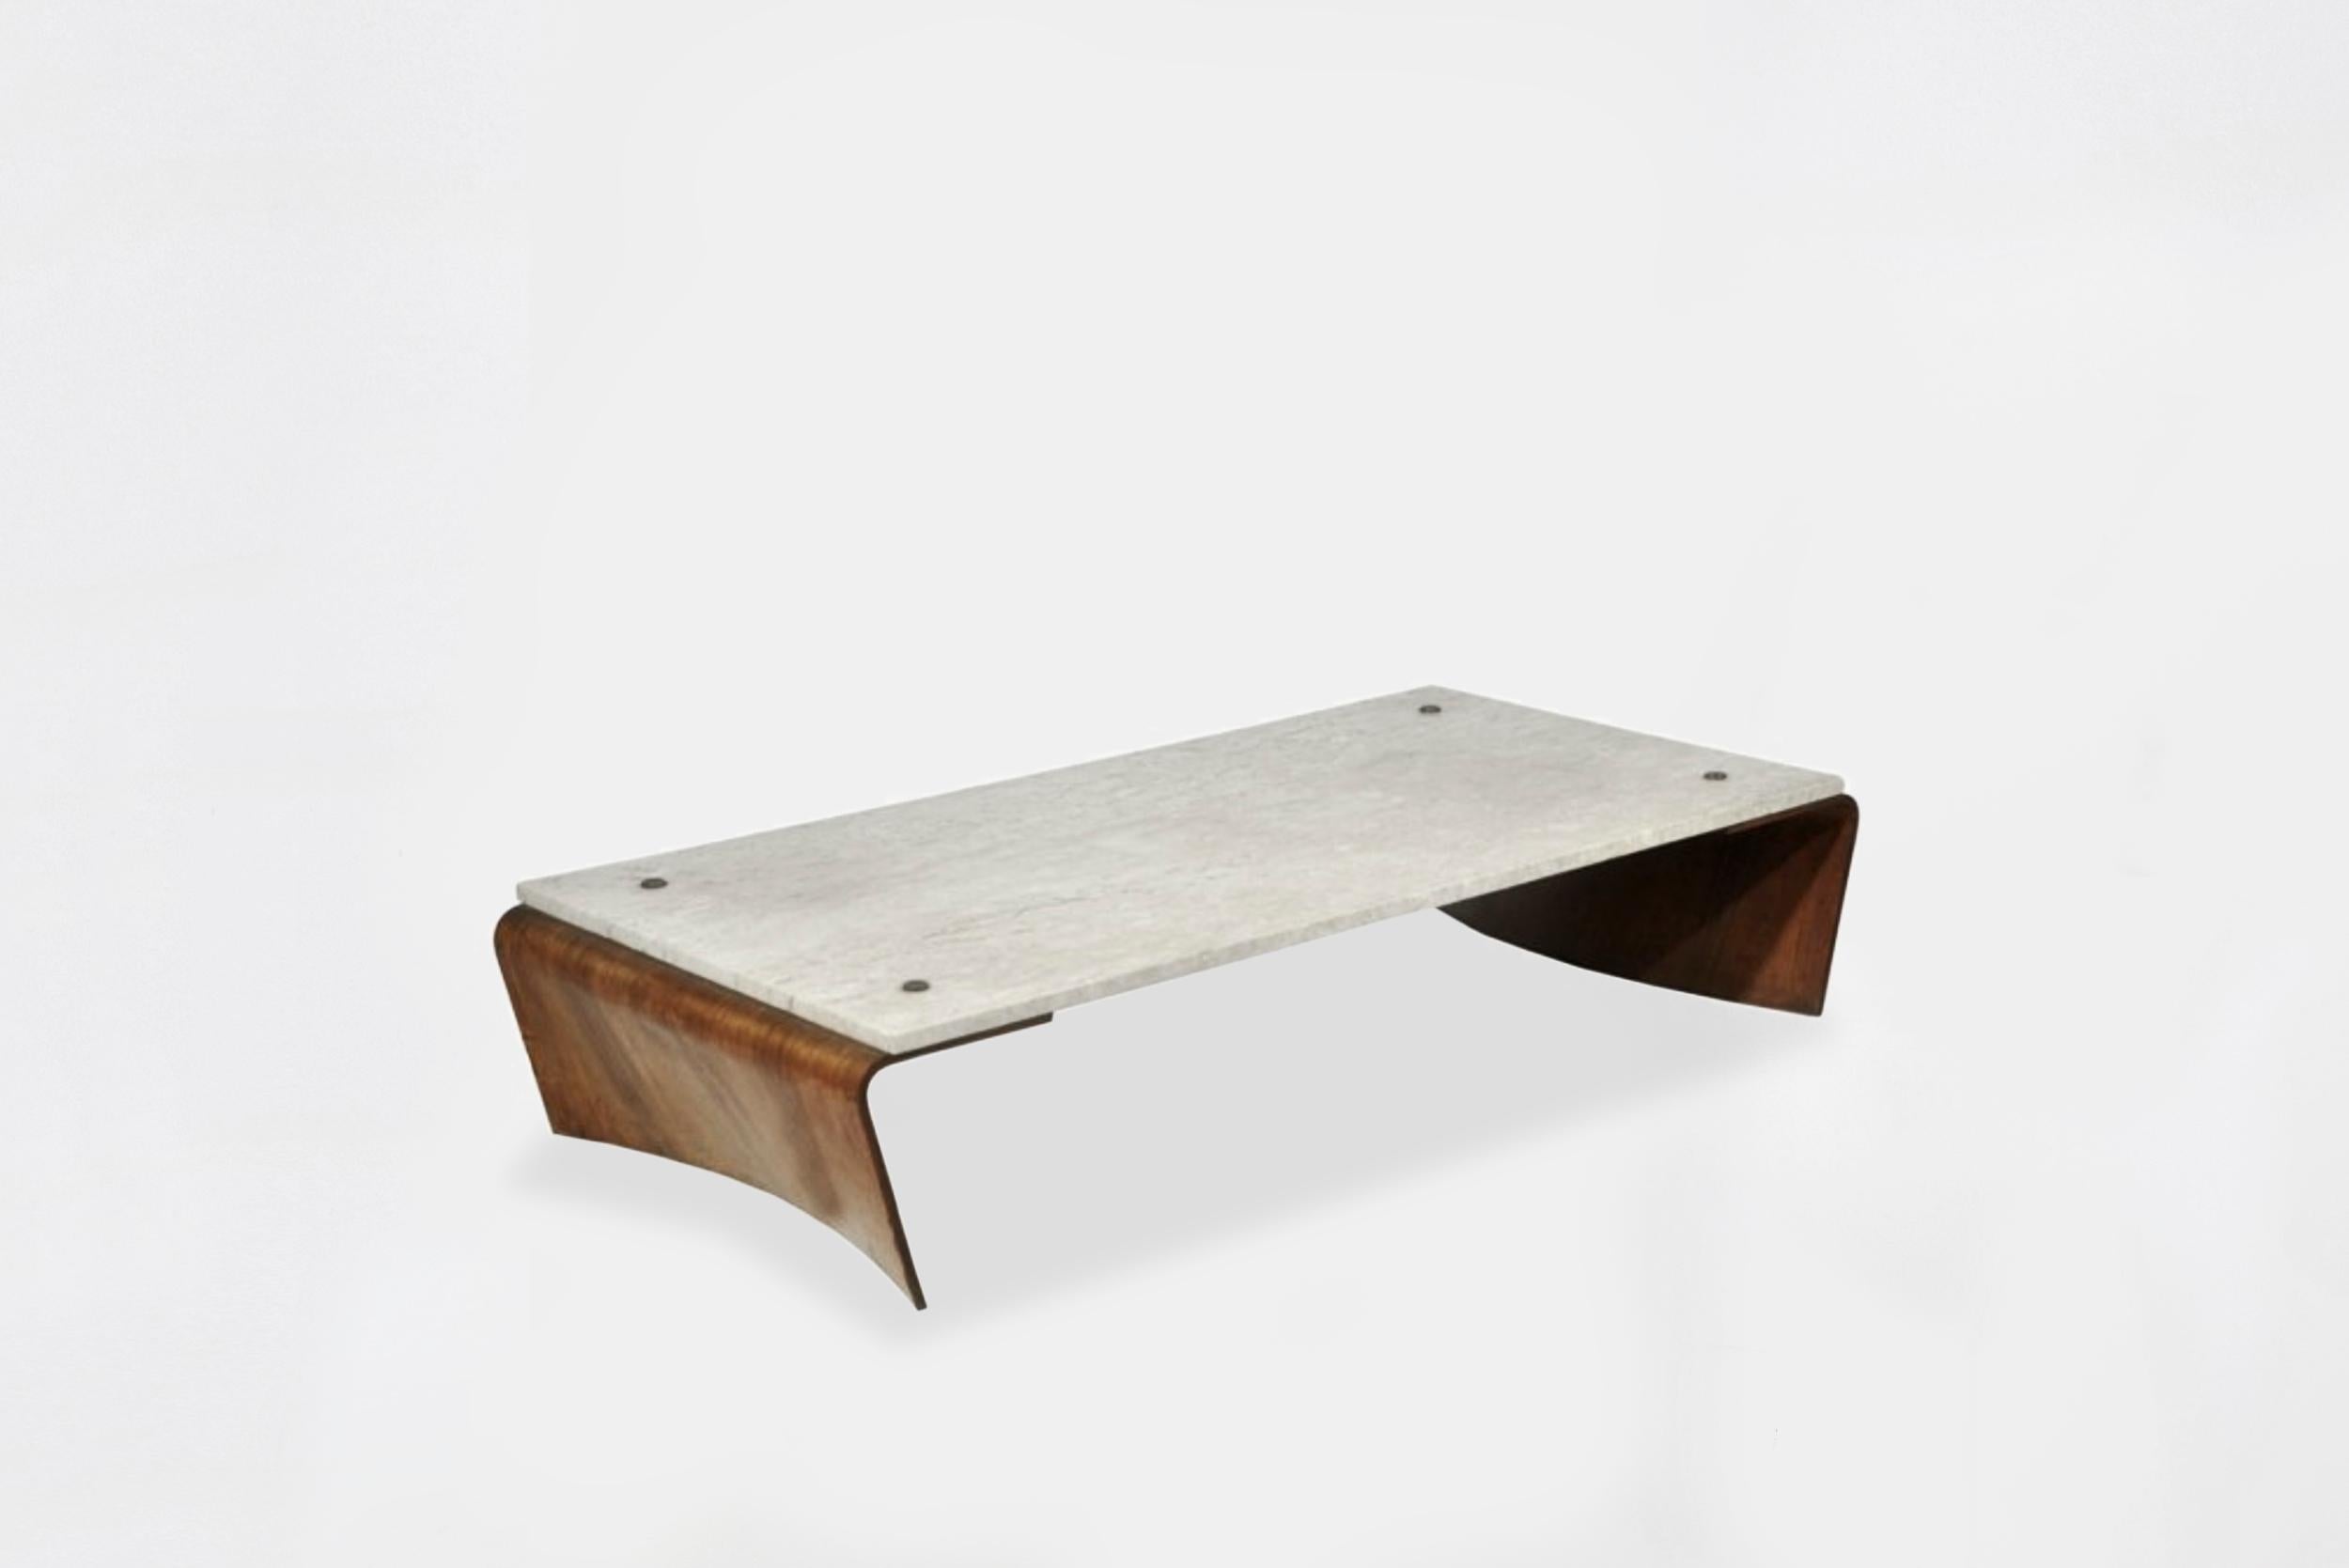 Jorge Zalszupin 
Coffee table model “Romana”
Manufactured by L’Atelier
Brazil, 1960s
Jacaranda, marble
From the archives of Side Gallery, Barcelona
Measurements:
137.16 cm x 68.58 cm x 30.48 H cm
54 in x 27 in x 12 H in

Literature
Maria